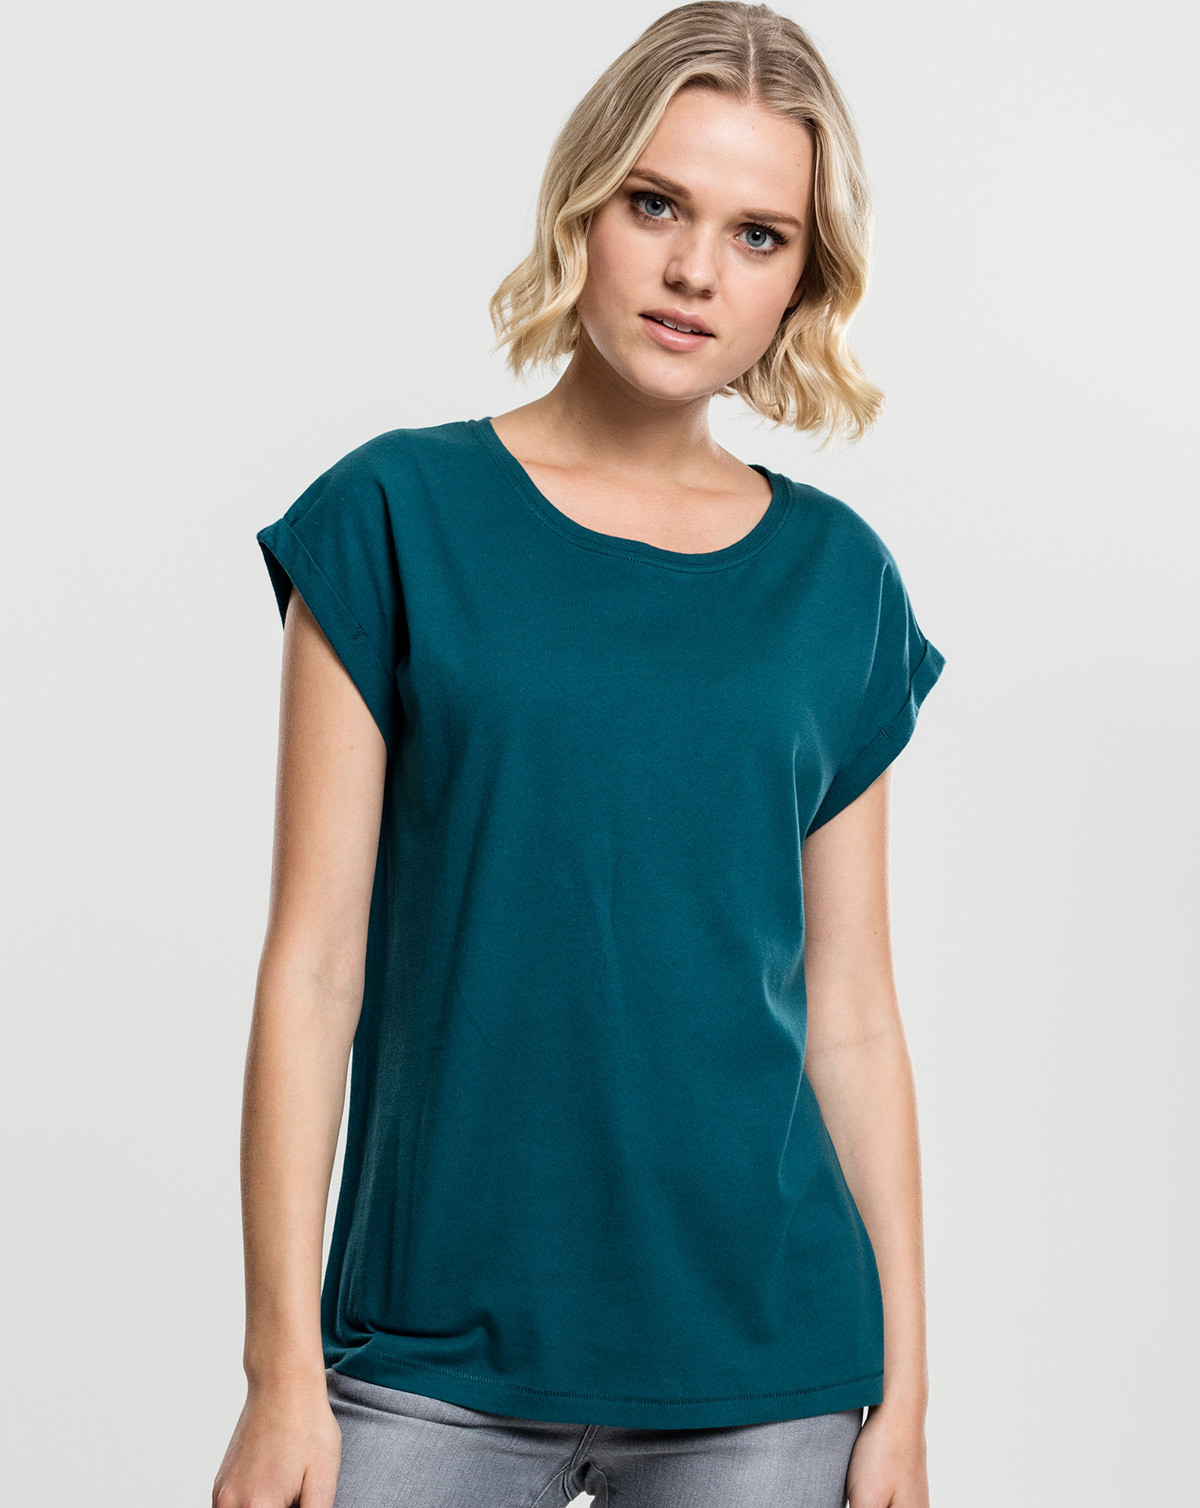 Urban Classics Ladies Extended Shoulder Tee (Teal, XS)